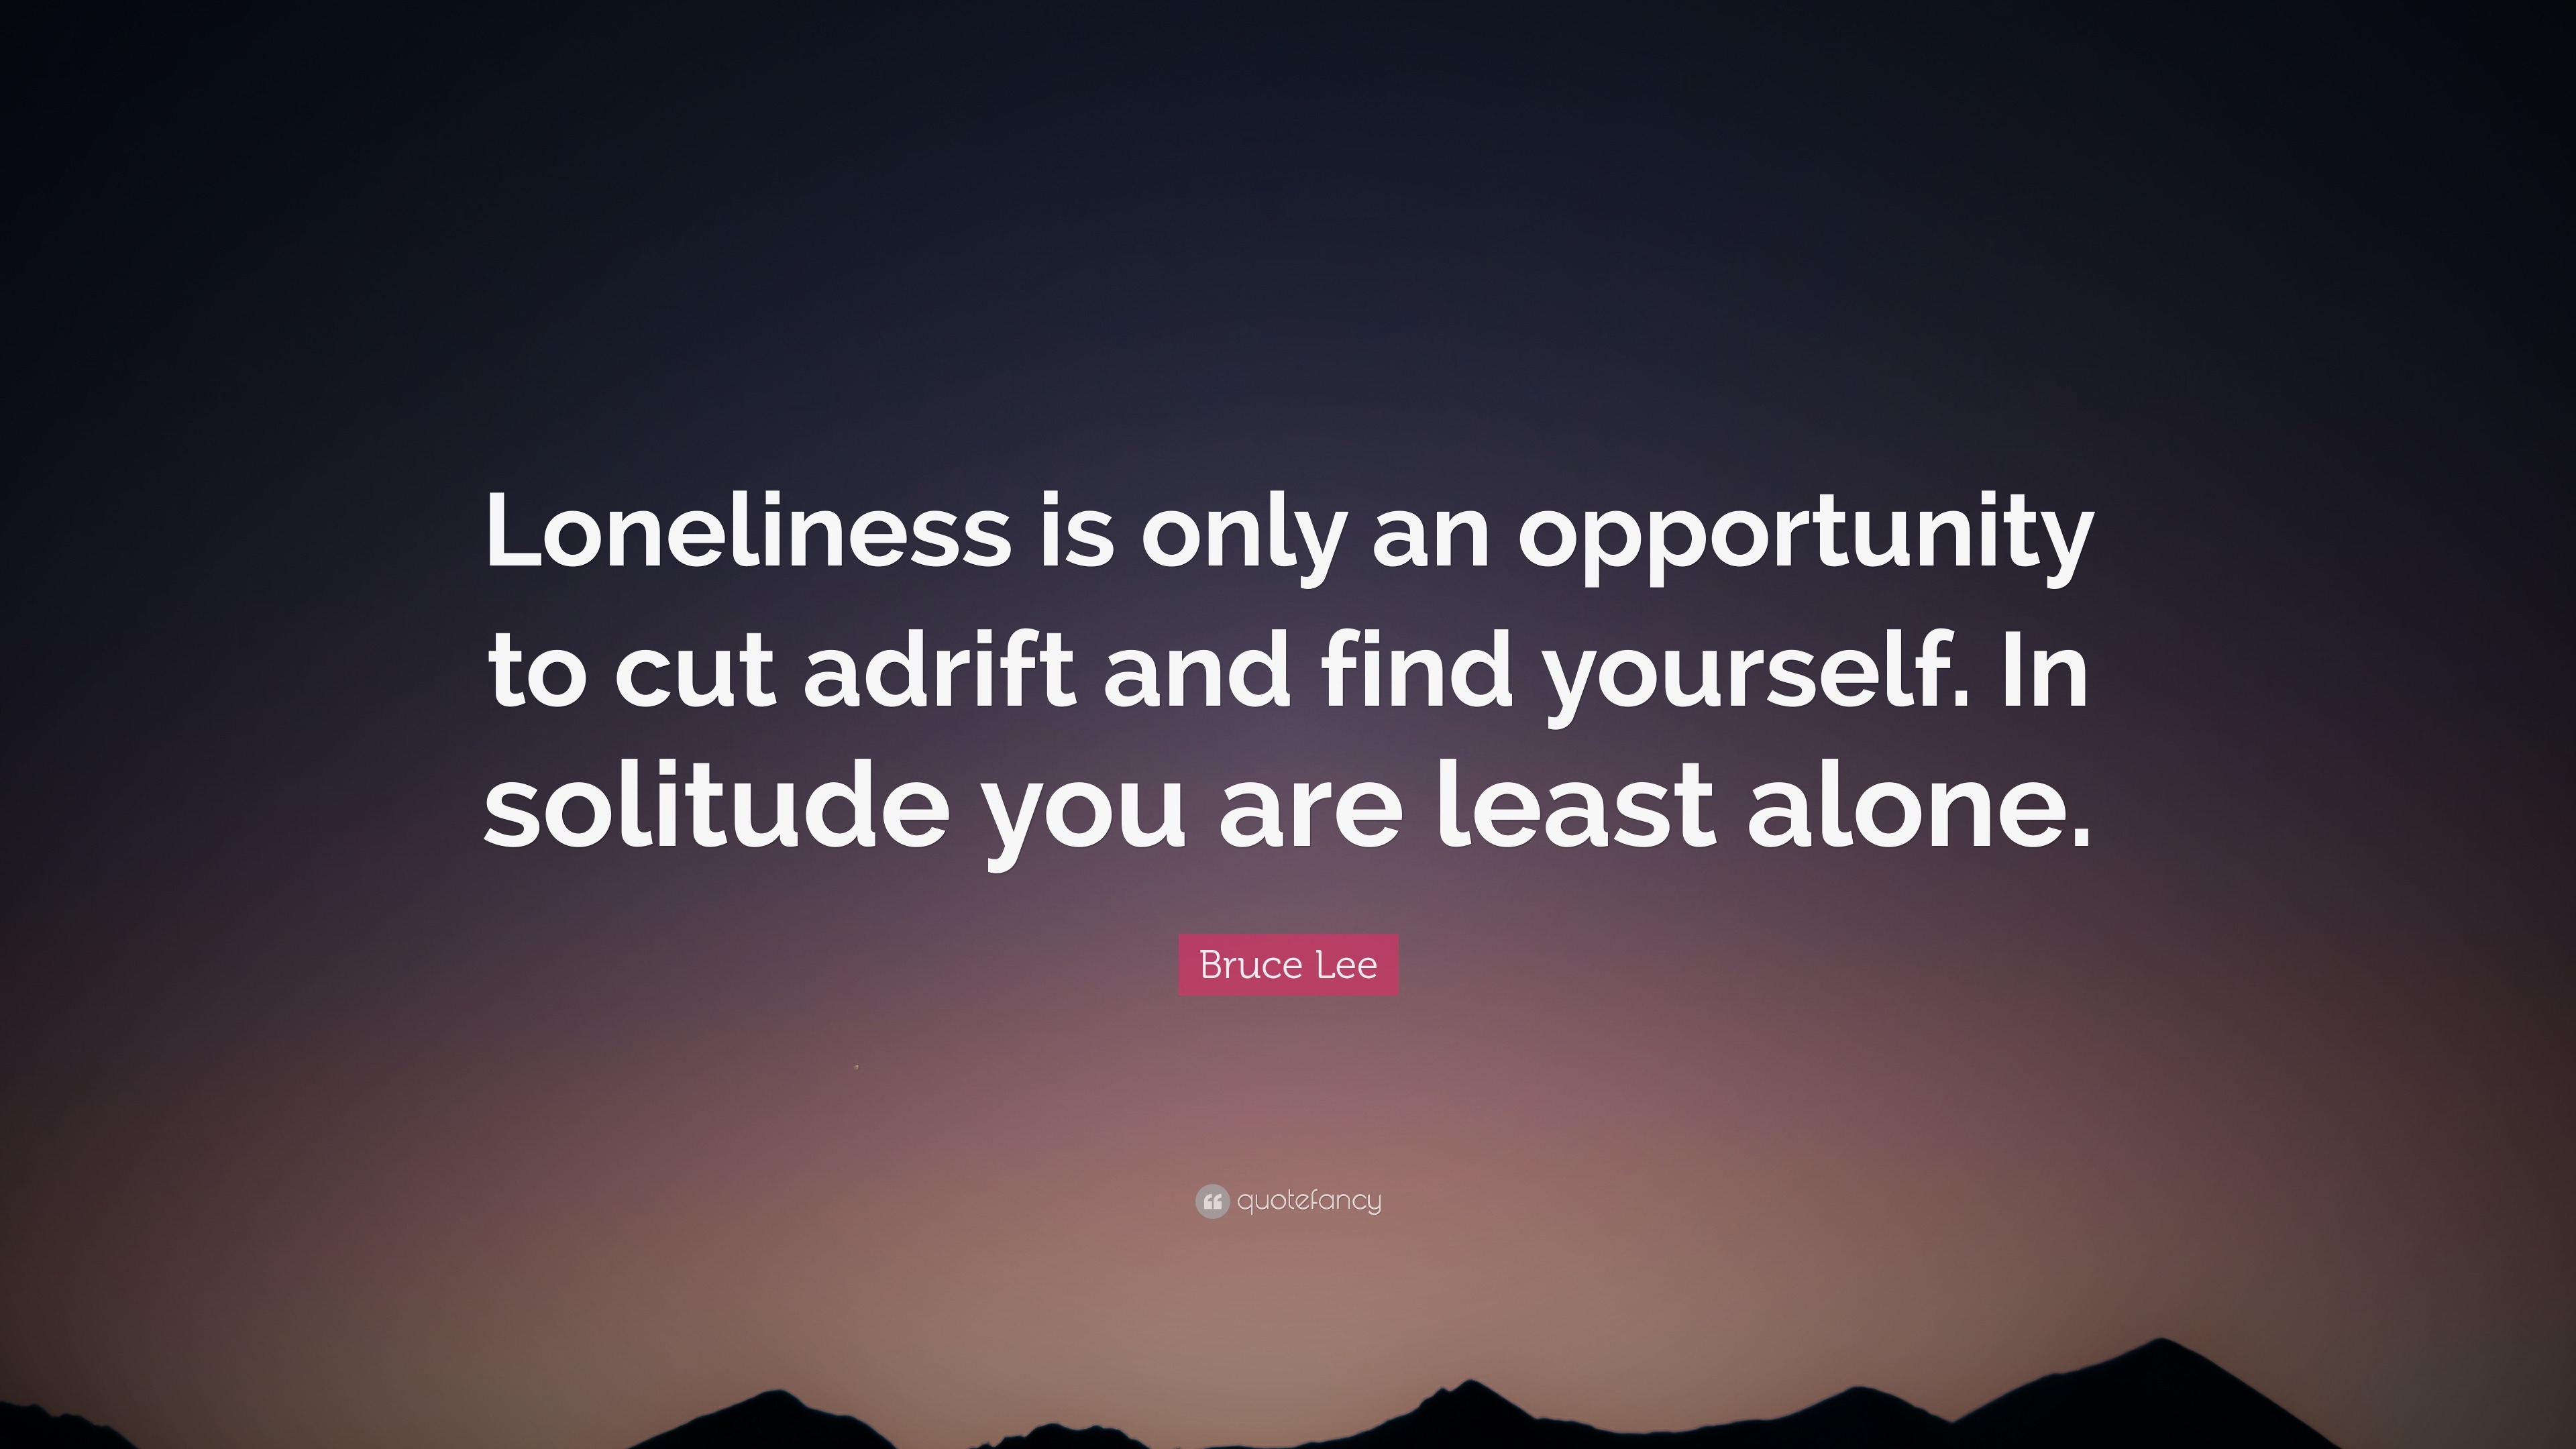 Bruce Lee Quote: “Loneliness is only an opportunity to cut adrift and ...